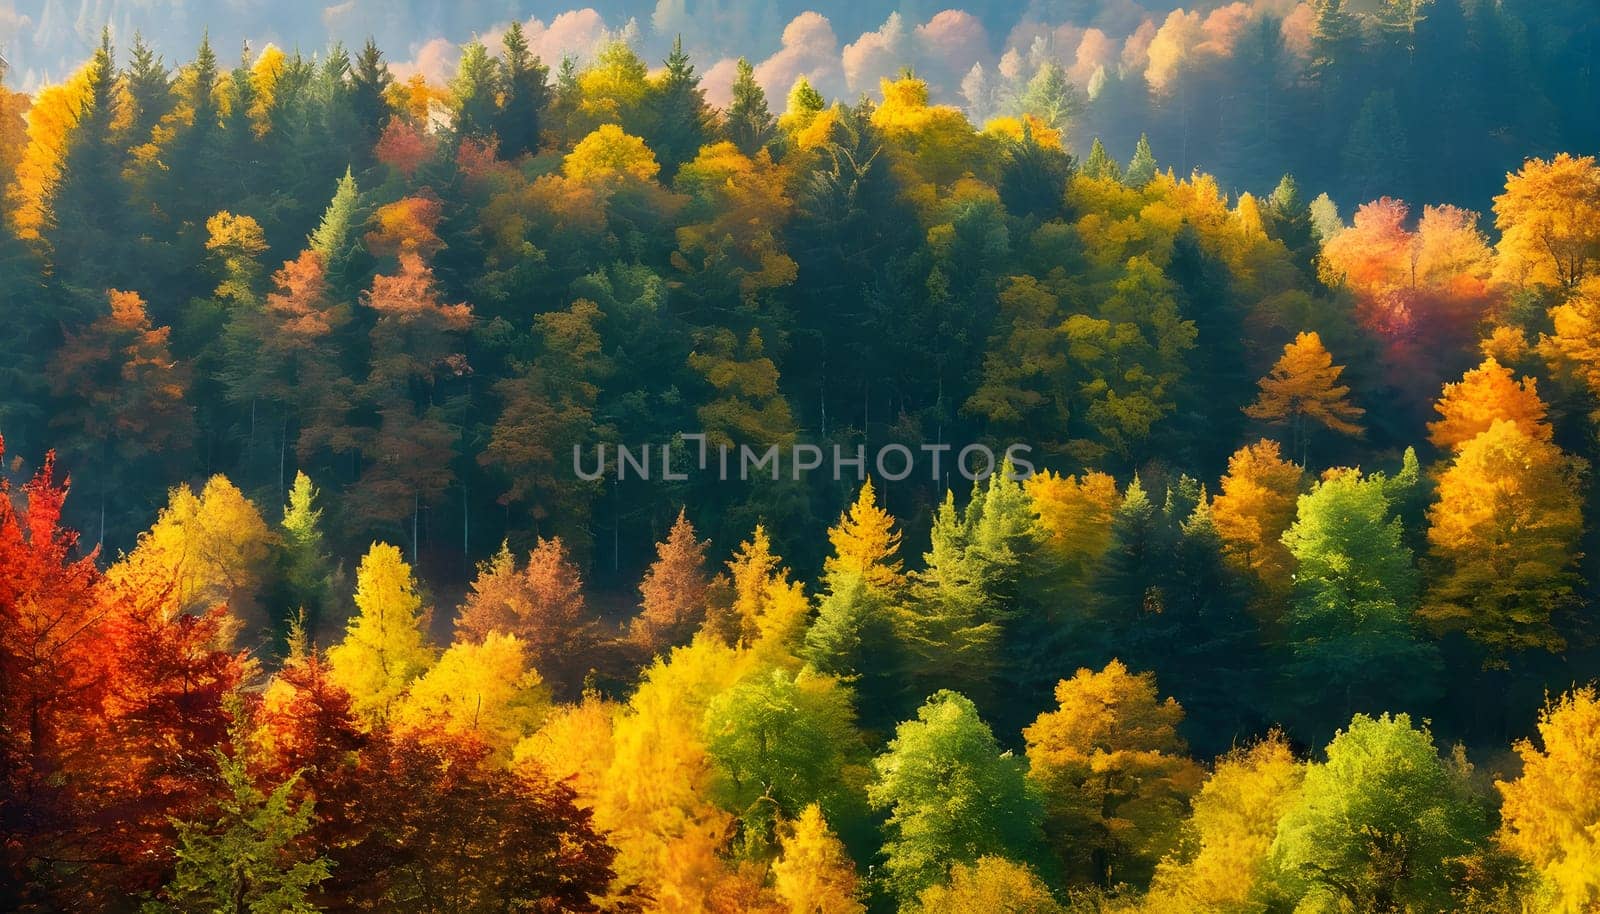 Golden Tranquility: Exploring the Autumn Forest